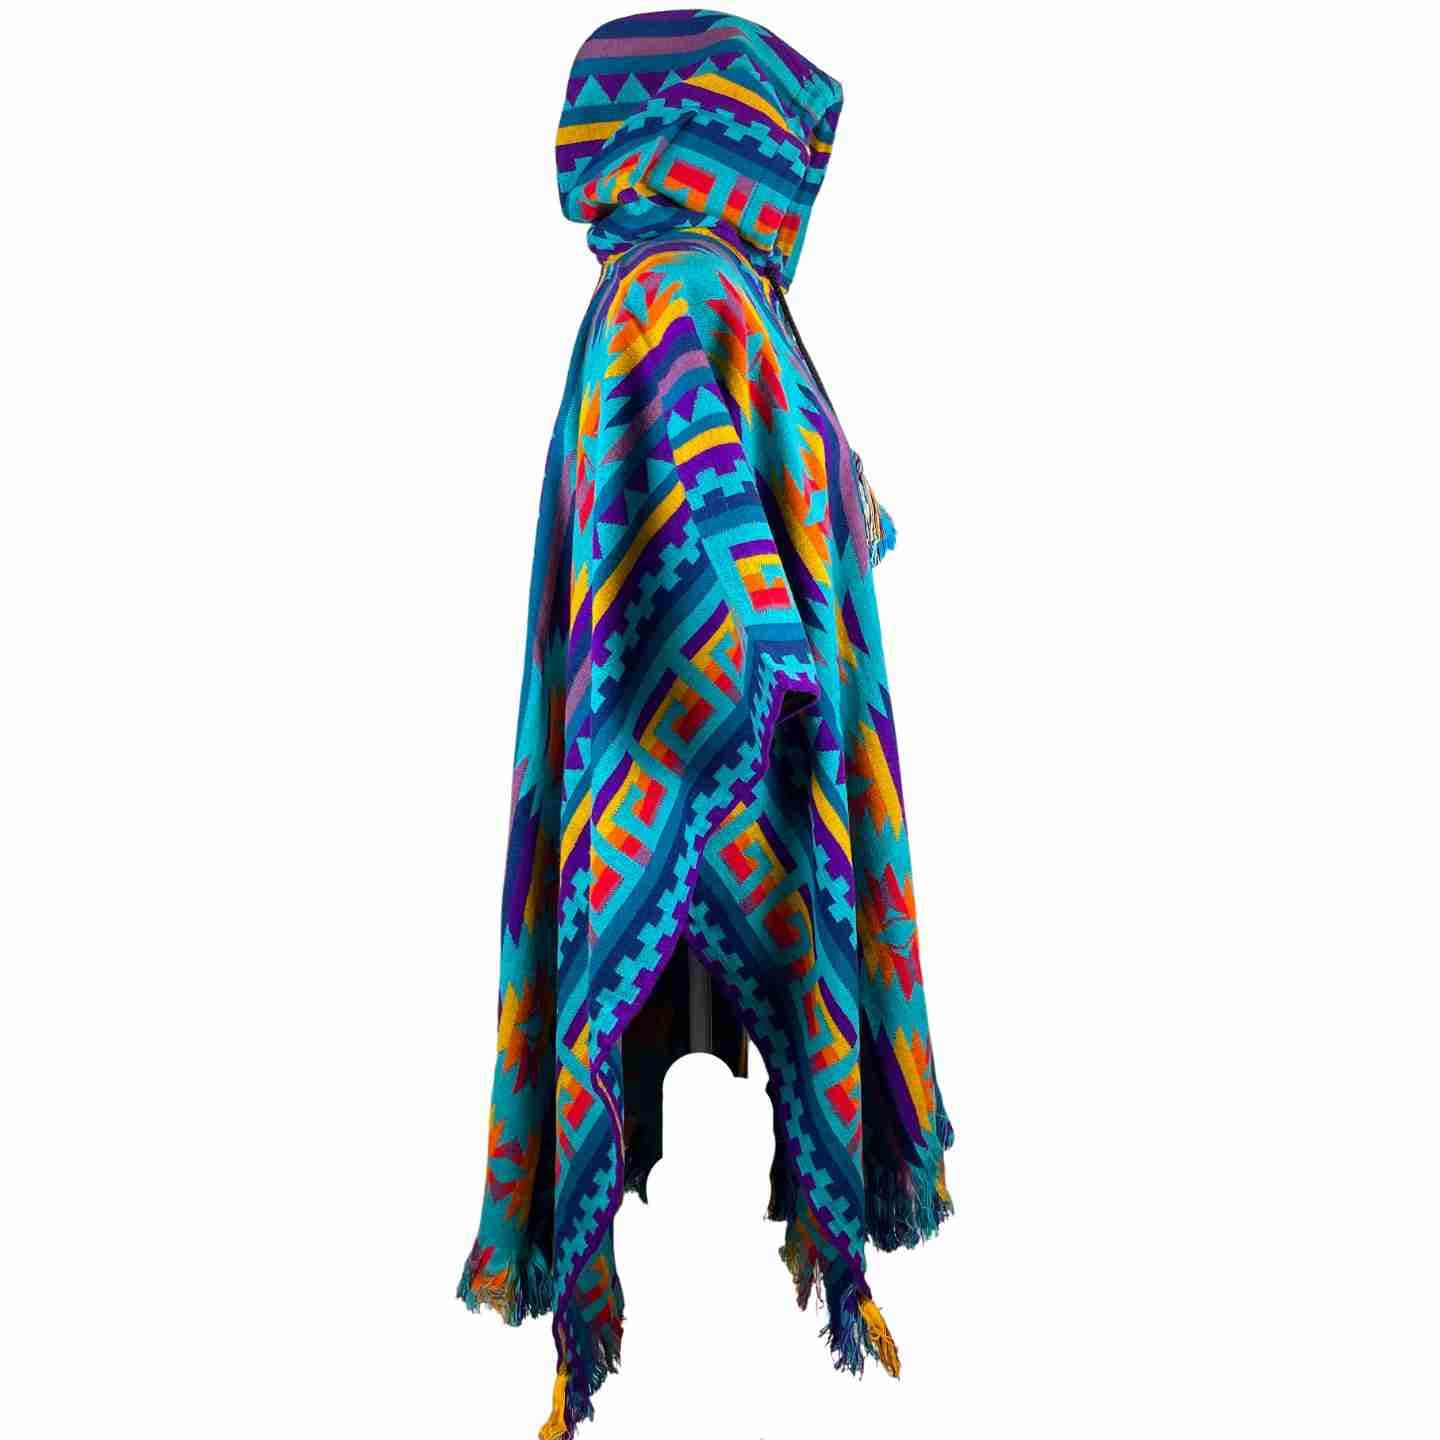 Stylish Men's Hooded Poncho | Teal Yellow Red